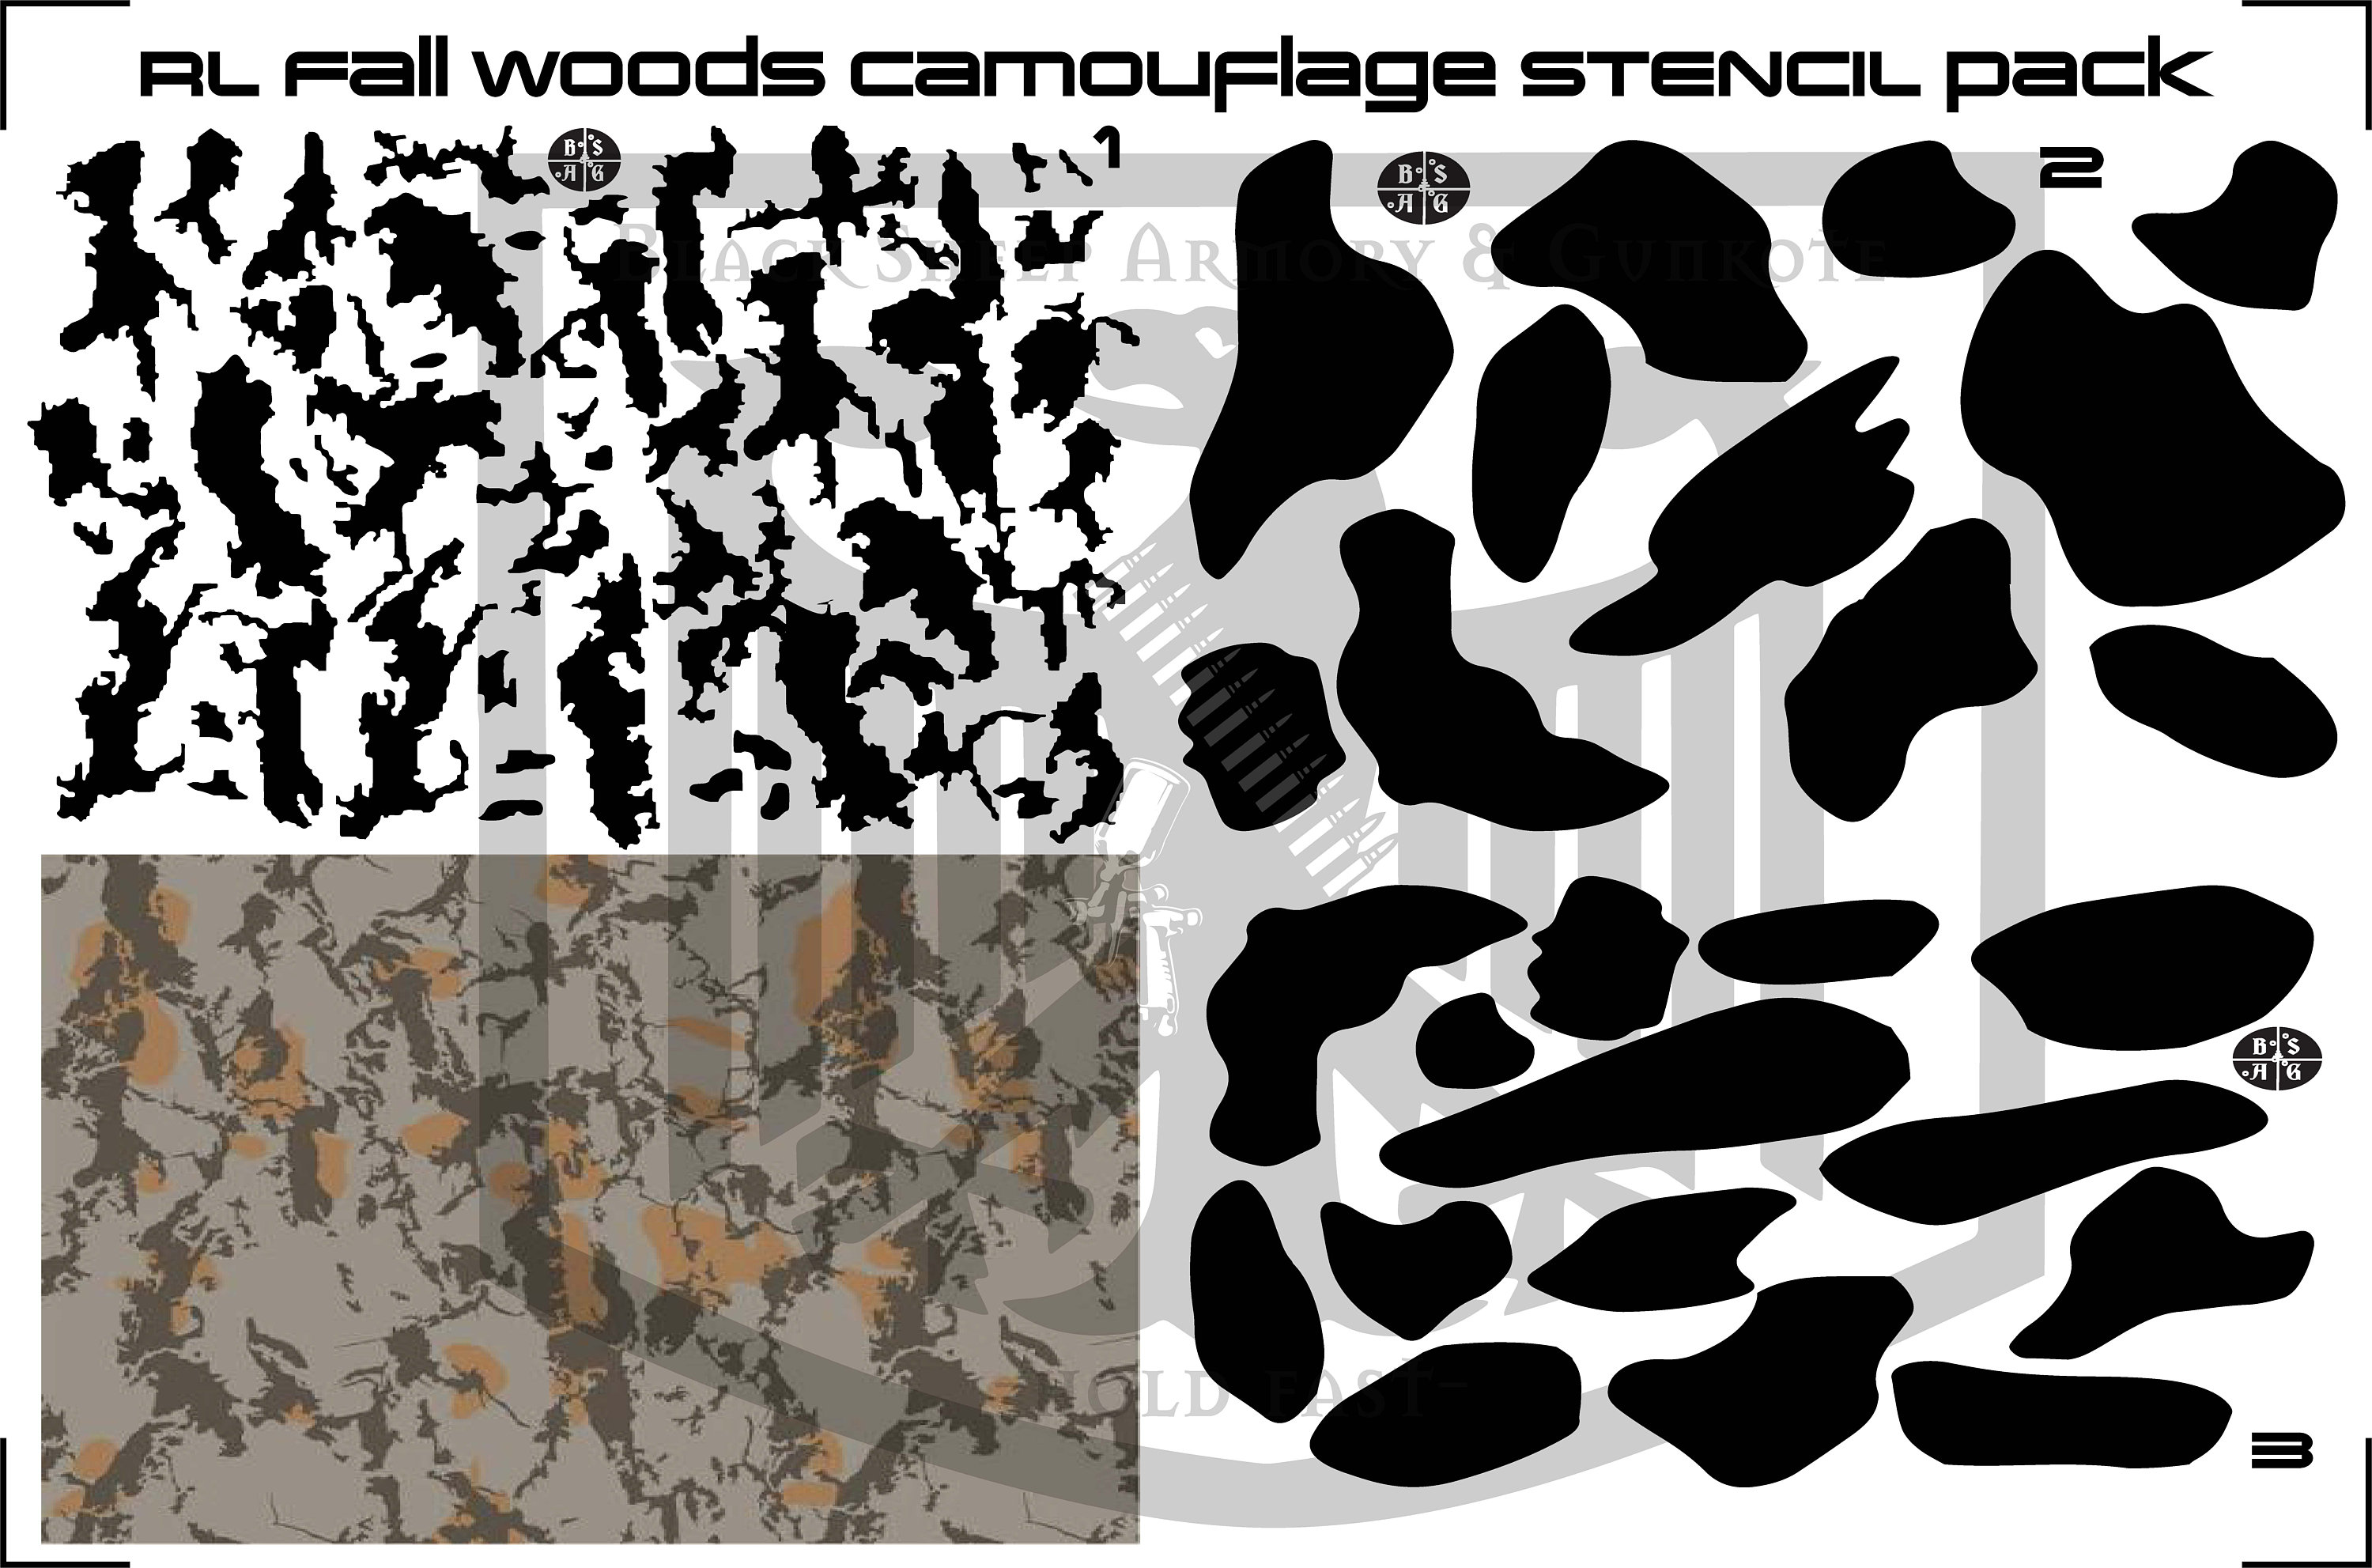 Spray Paint Camouflage Stencils Camo Jon Duck Boat Hunting Cattail 4 Pack Set